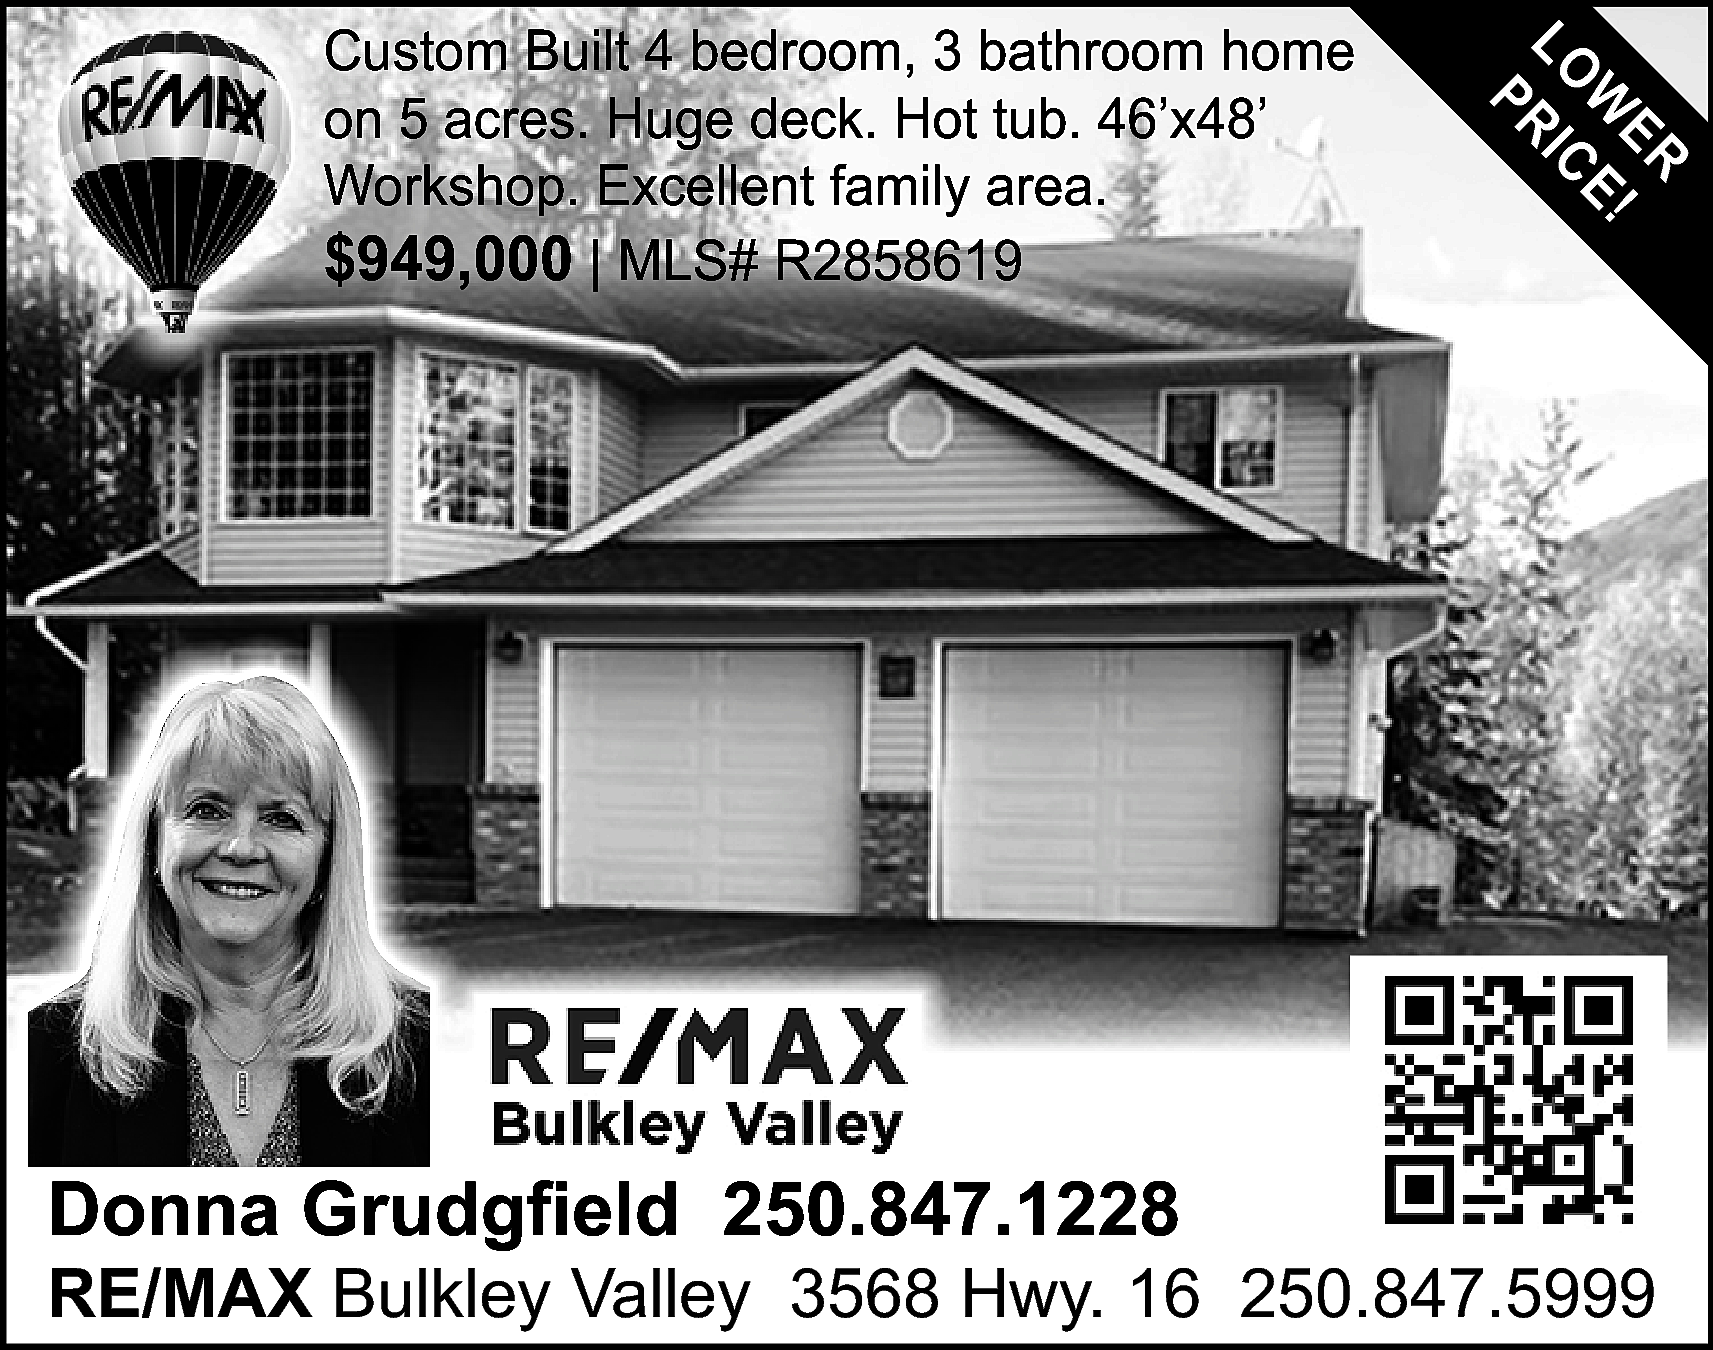 Donna Grudgfield 250.847.1228 <br> <br>ER  Donna Grudgfield 250.847.1228    ER  W E!  LO RIC  P    Custom Built 4 bedroom, 3 bathroom home  on 5 acres. Huge deck. Hot tub. 46’x48’  Workshop. Excellent family area.  $949,000 | MLS# R2858619    RE/MAX Bulkley Valley 3568 Hwy. 16 250.847.5999    